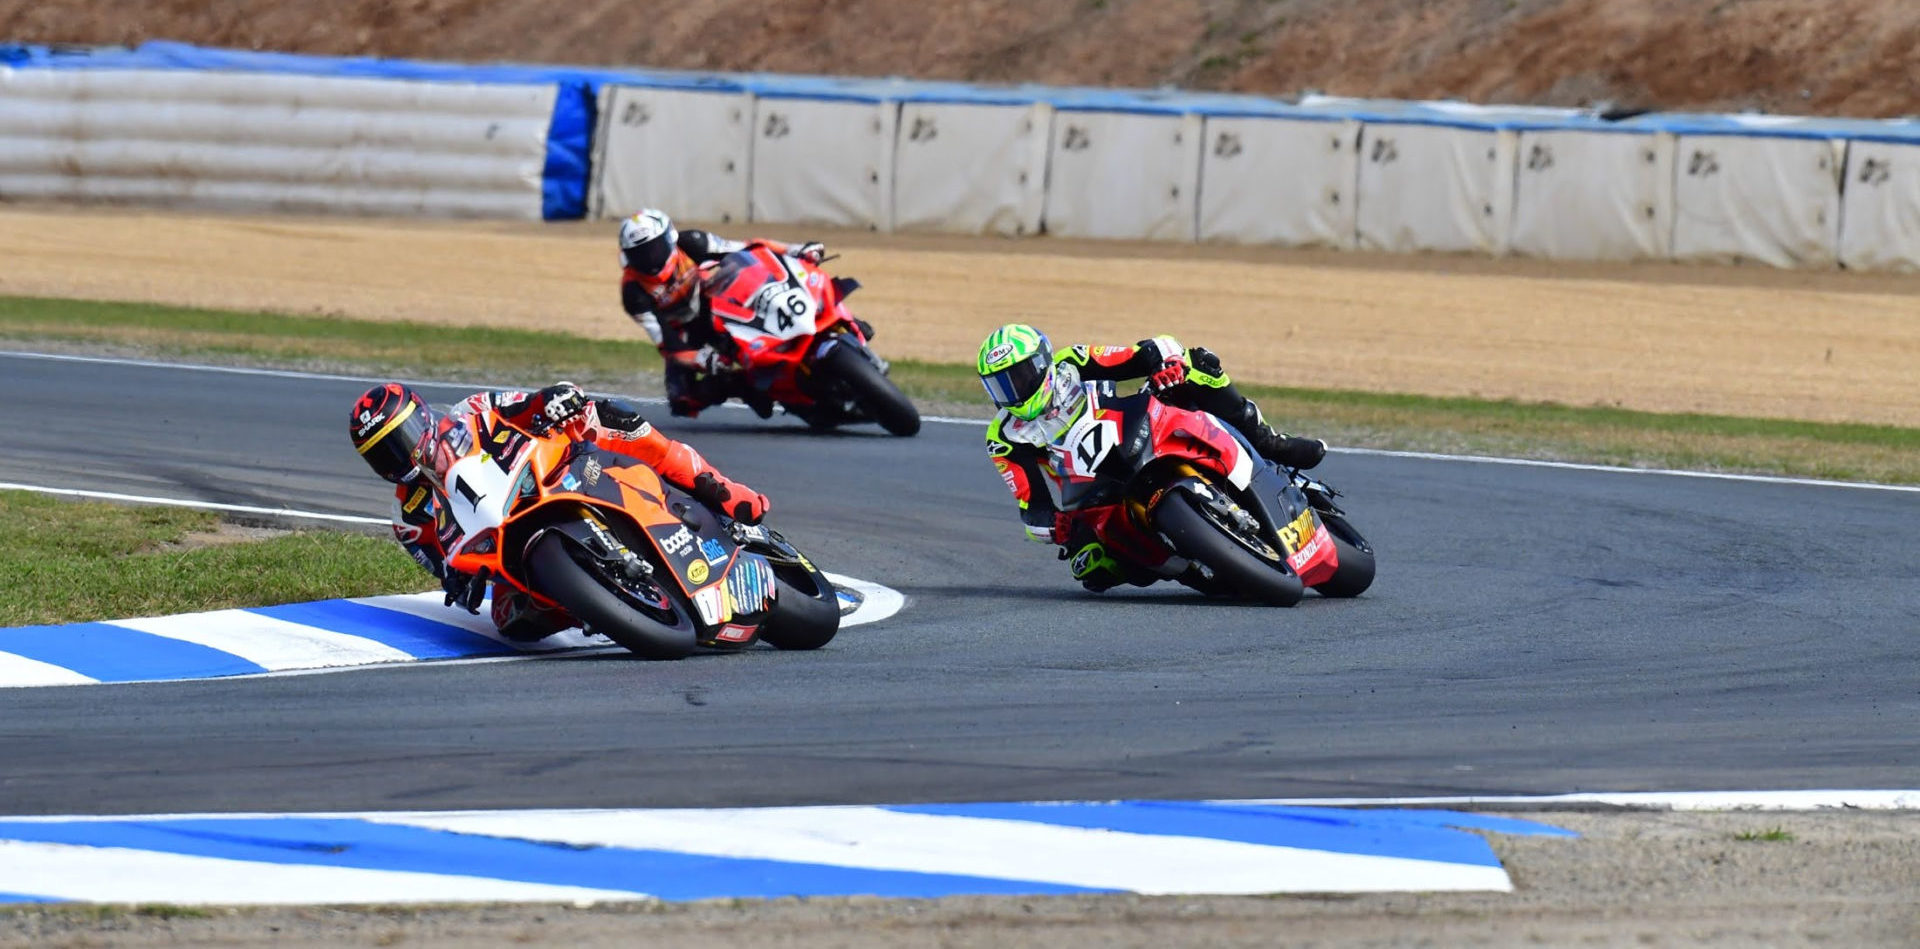 Wayne Maxwell (1) leads Troy Herfoss (17) and Mike Jones (46) at Wakefield Park. Photo by Optikal Photography, courtesy ASBK.